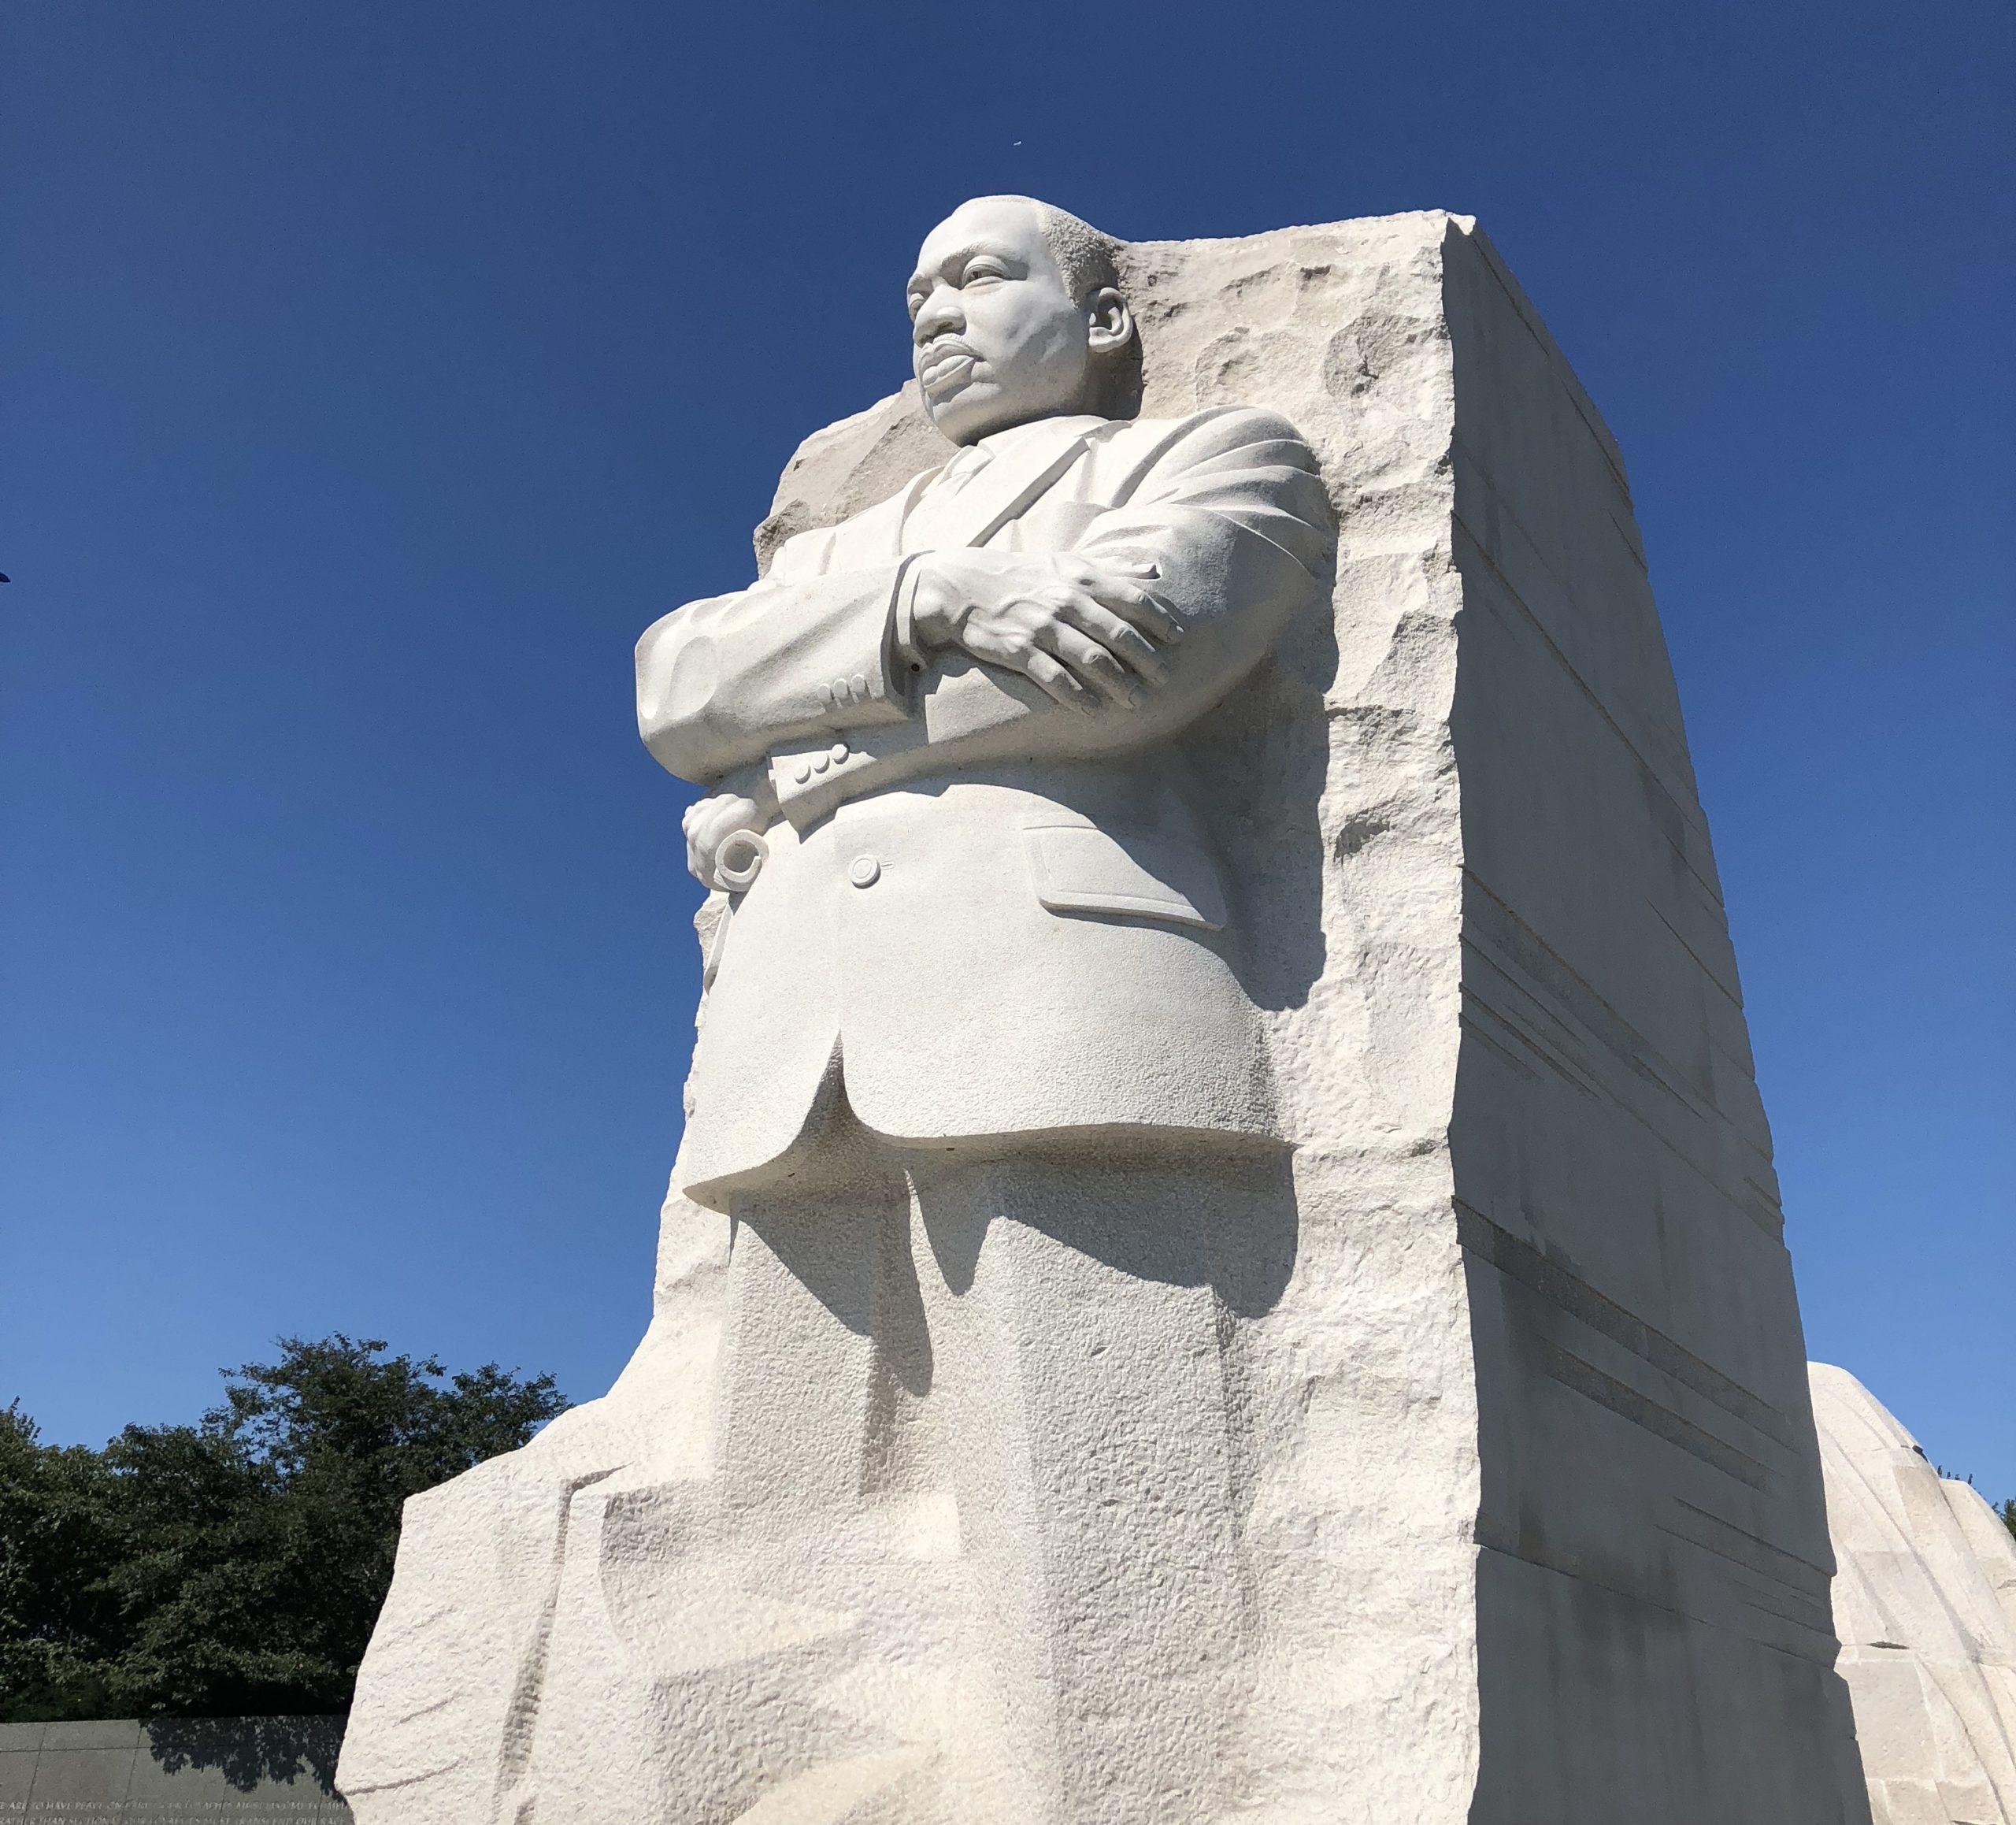 Image of Martin Luther King, Jr. carved into stone. Martin Luther King, Jr. Memorial in Washington D.C.